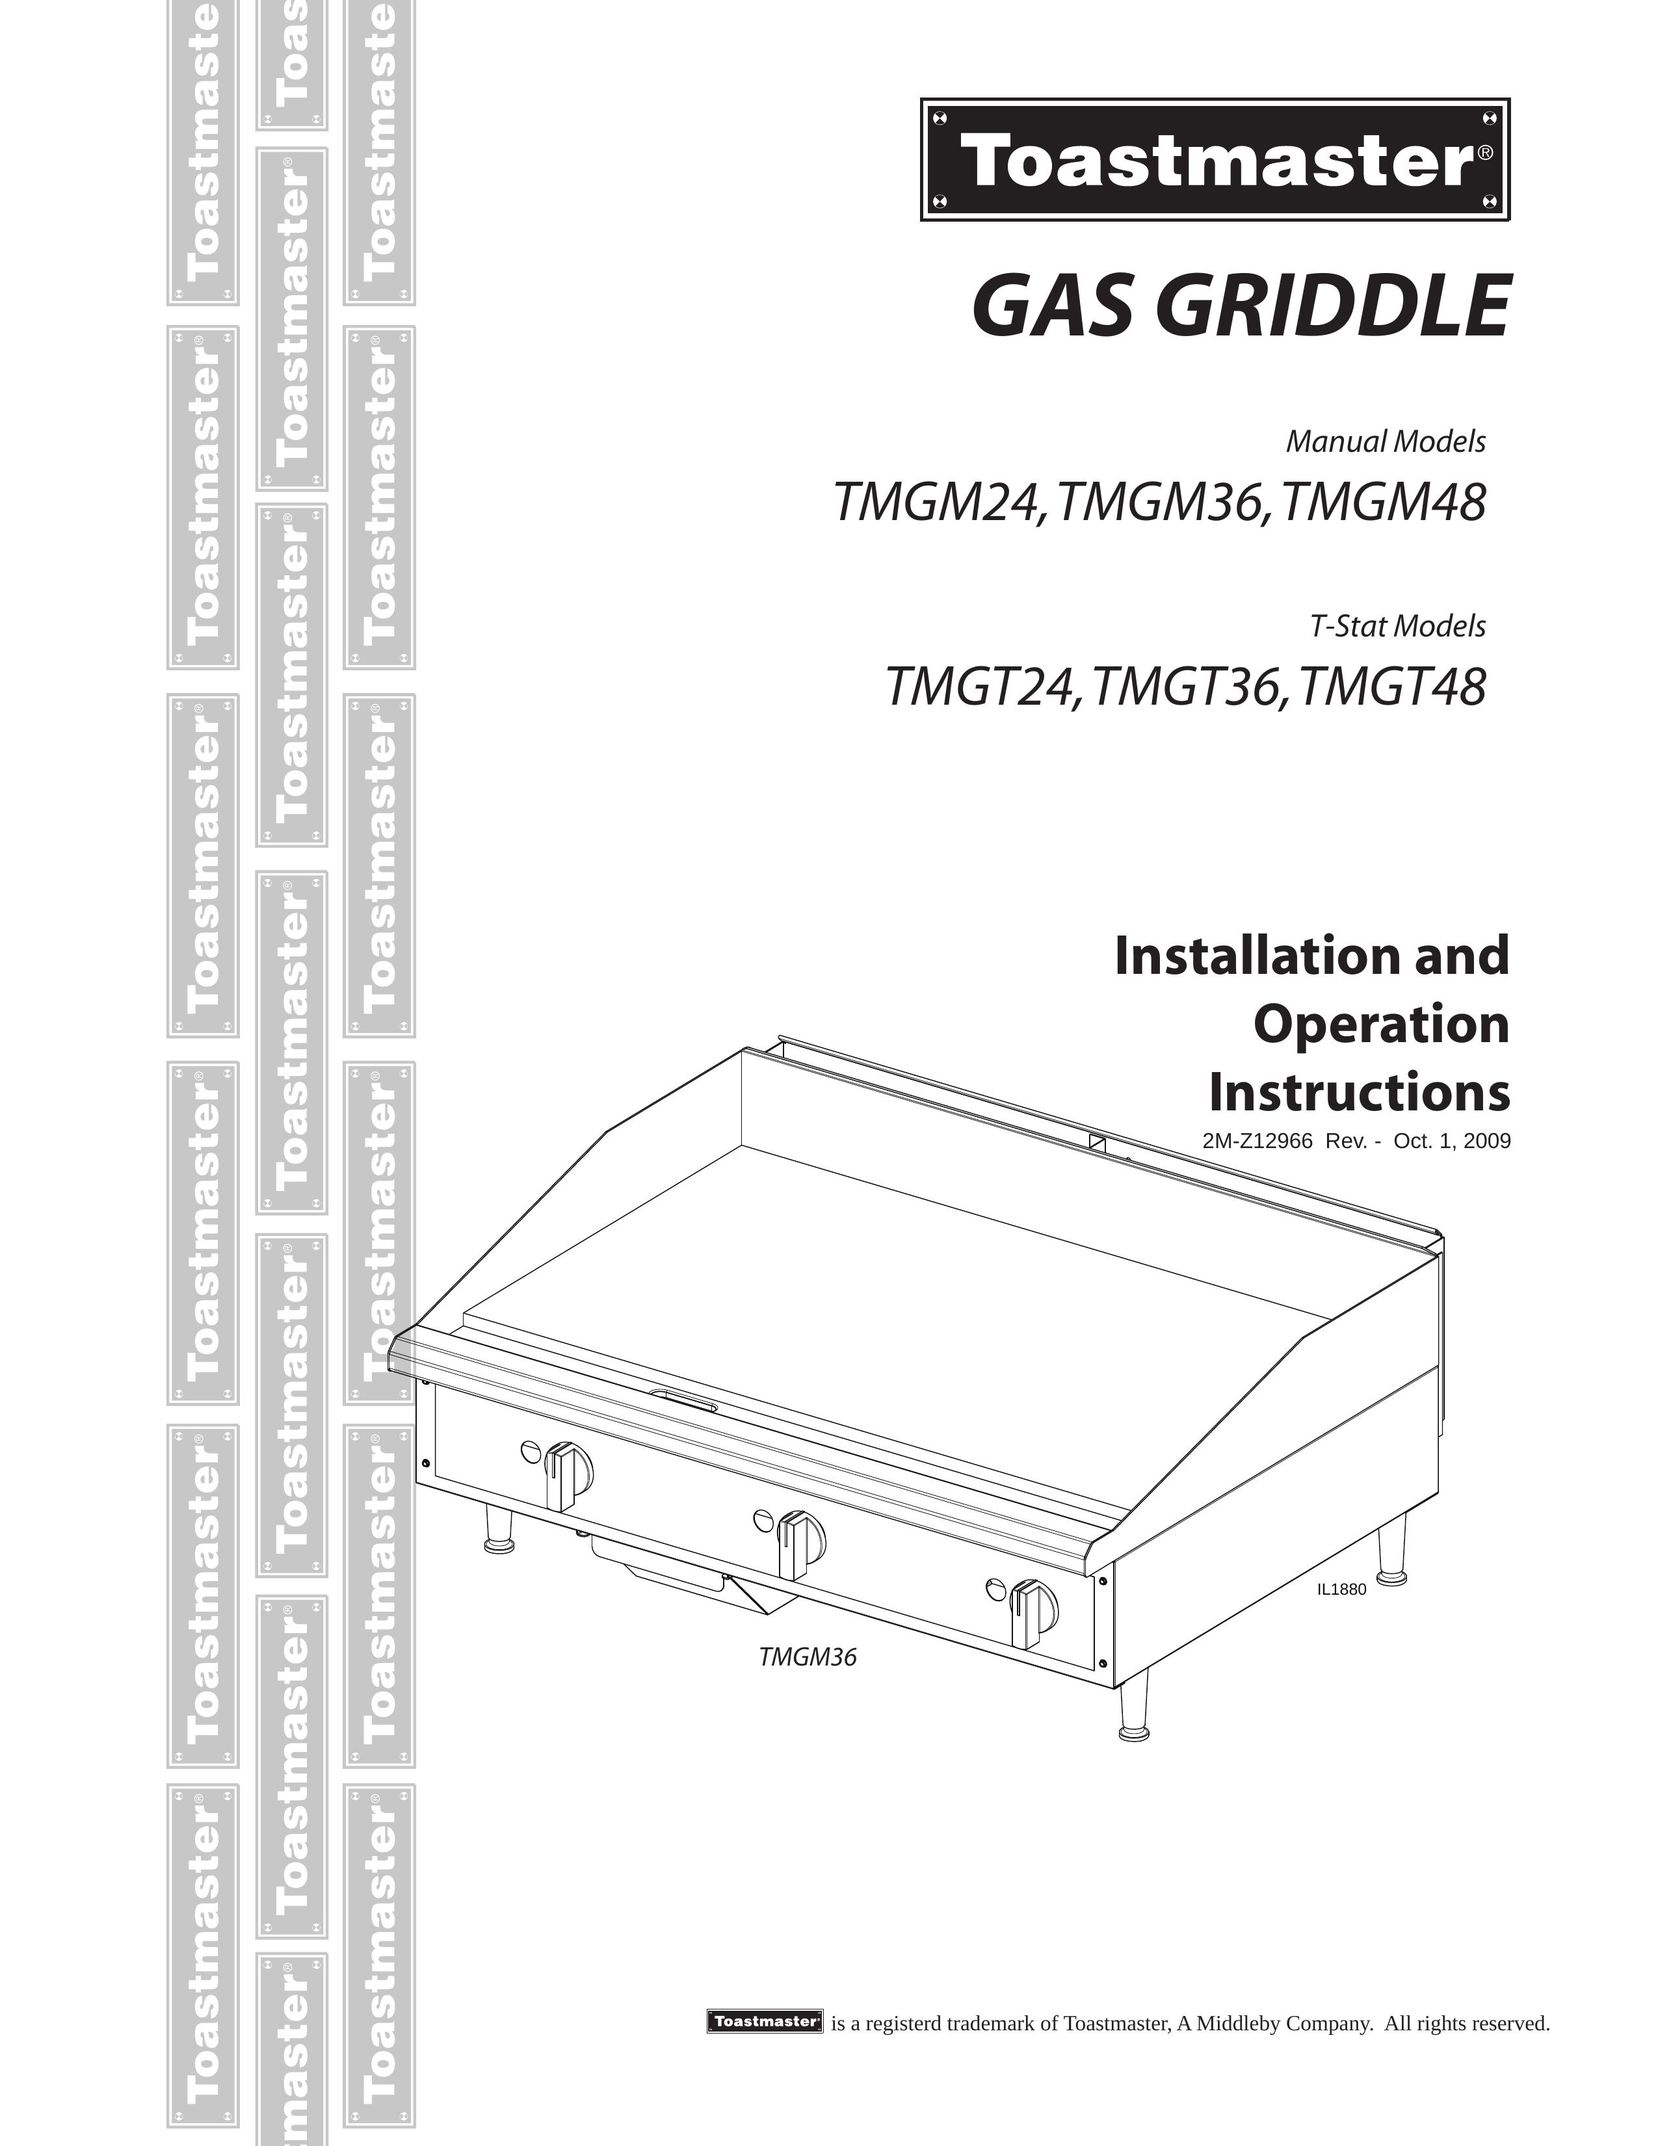 Toastmaster TMGM36 Griddle User Manual